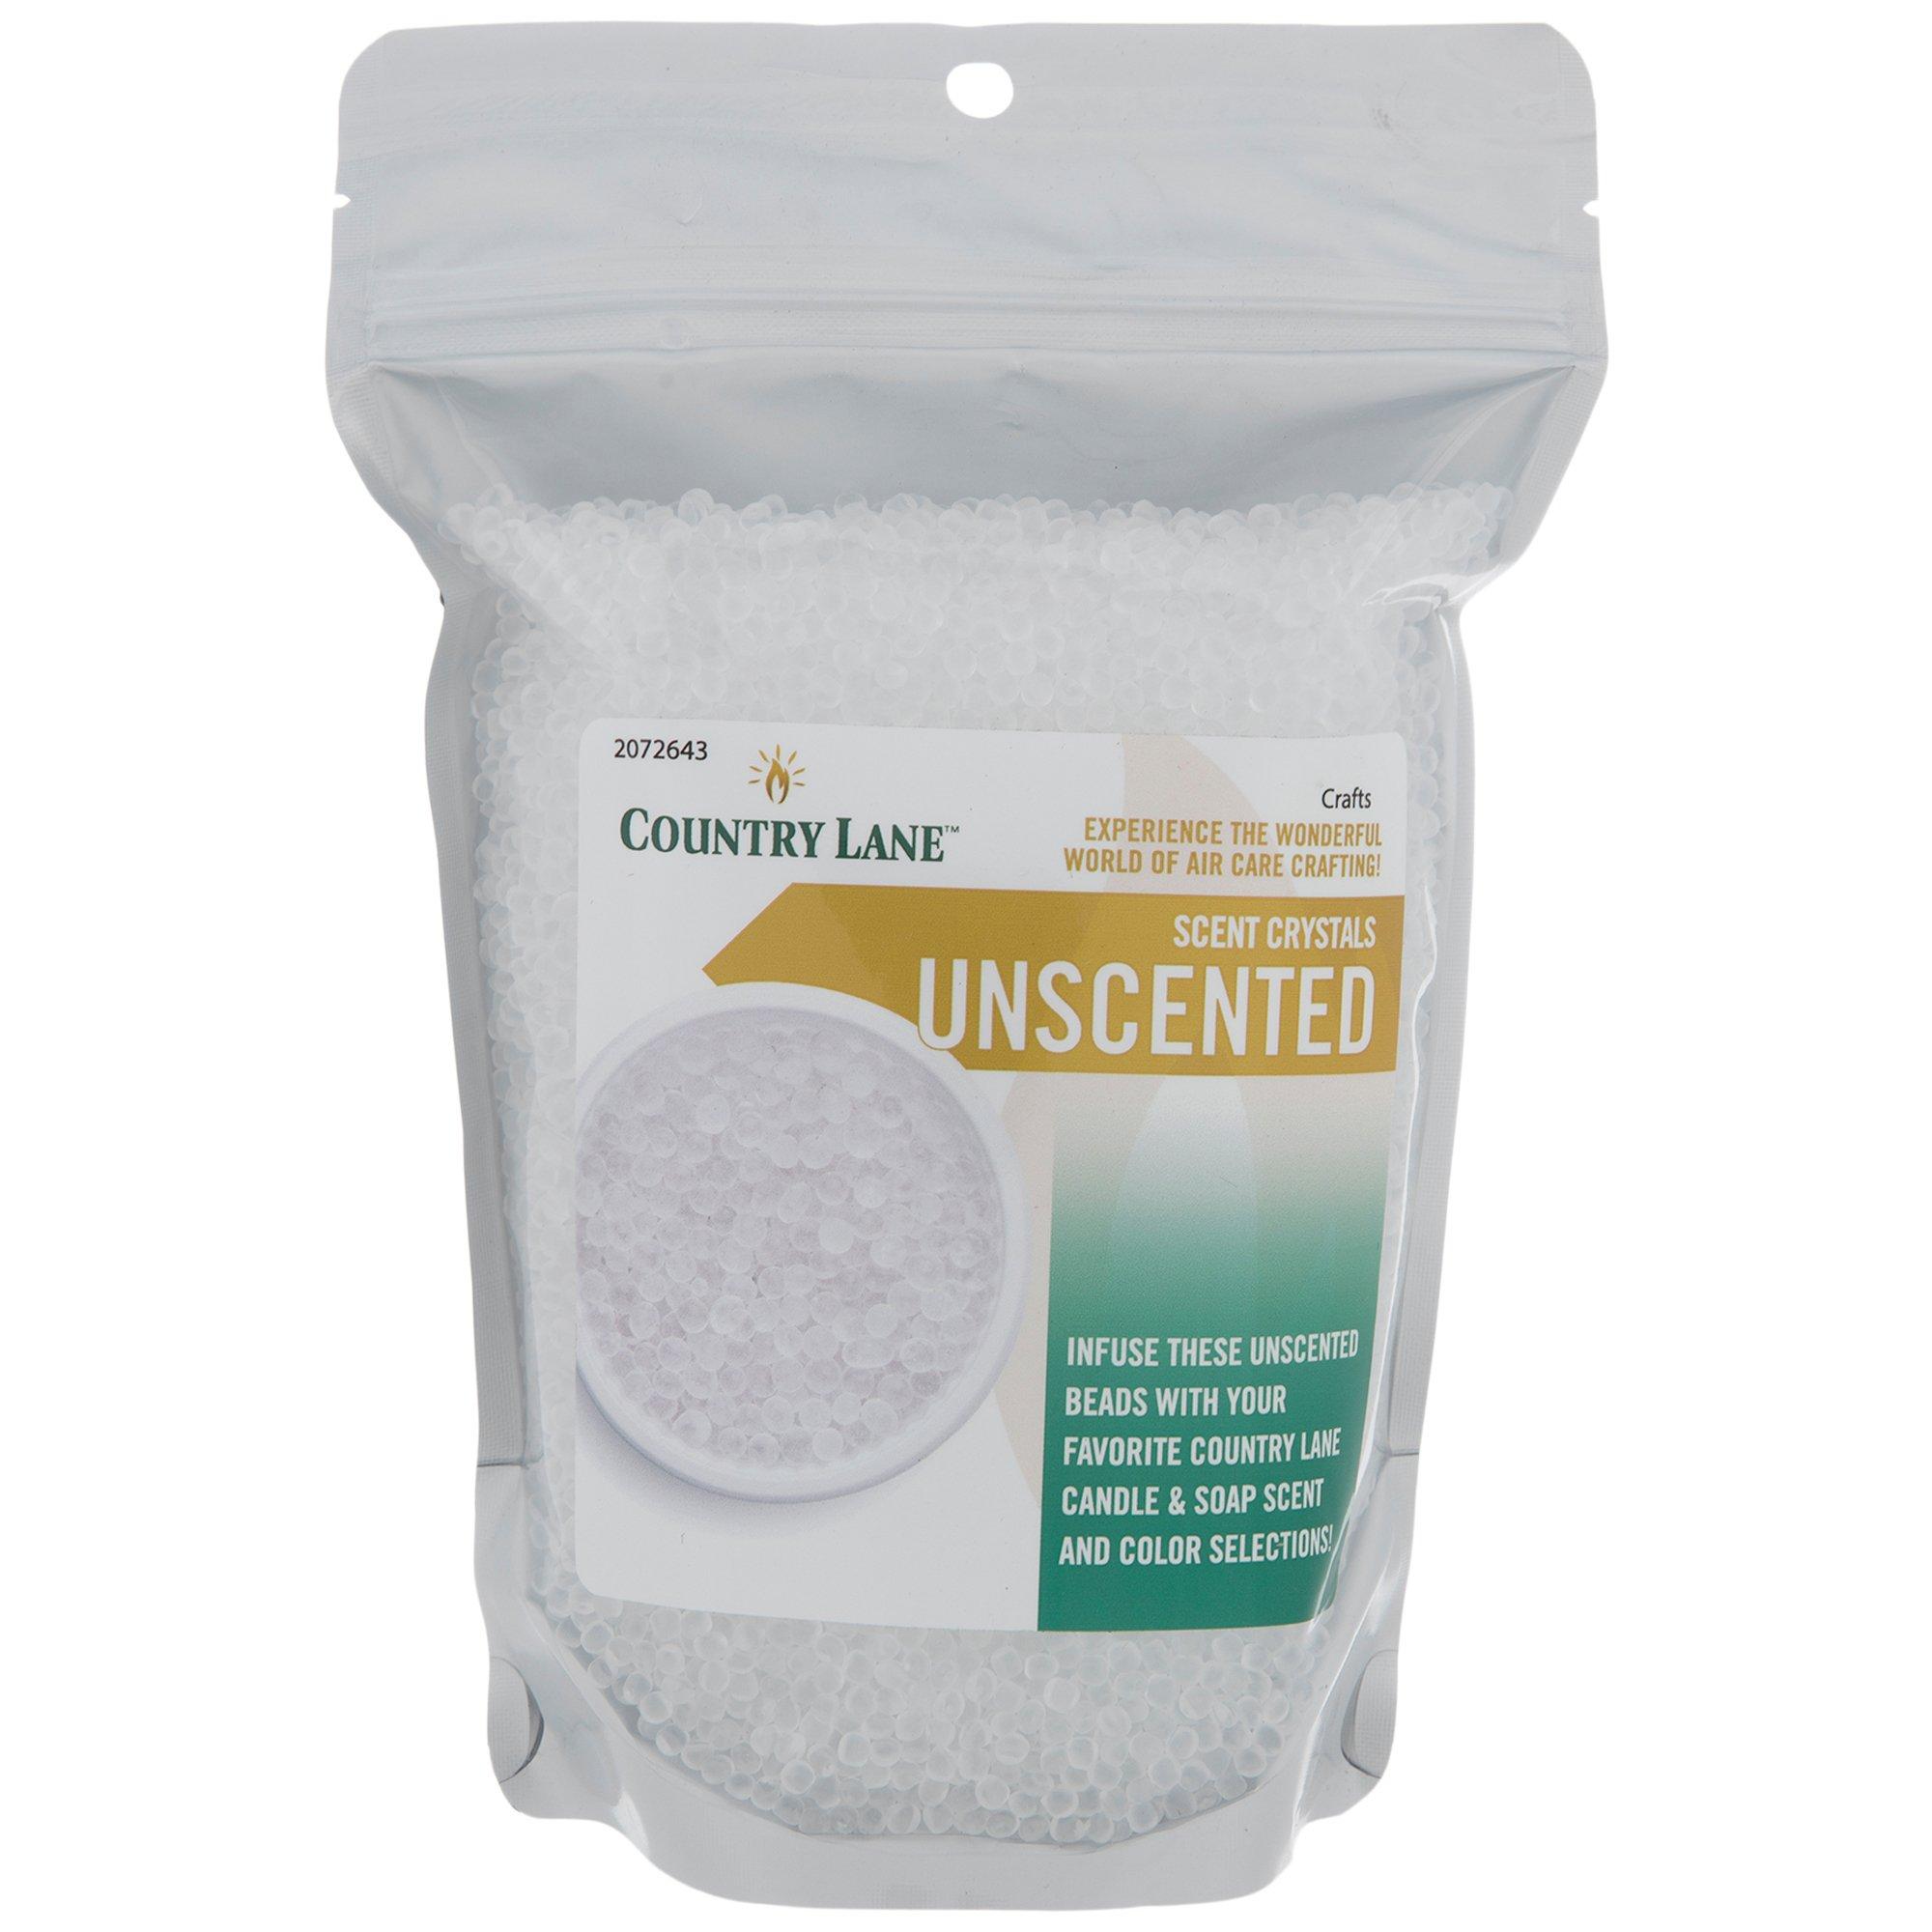 Clear UNSCENTED Aroma Beads